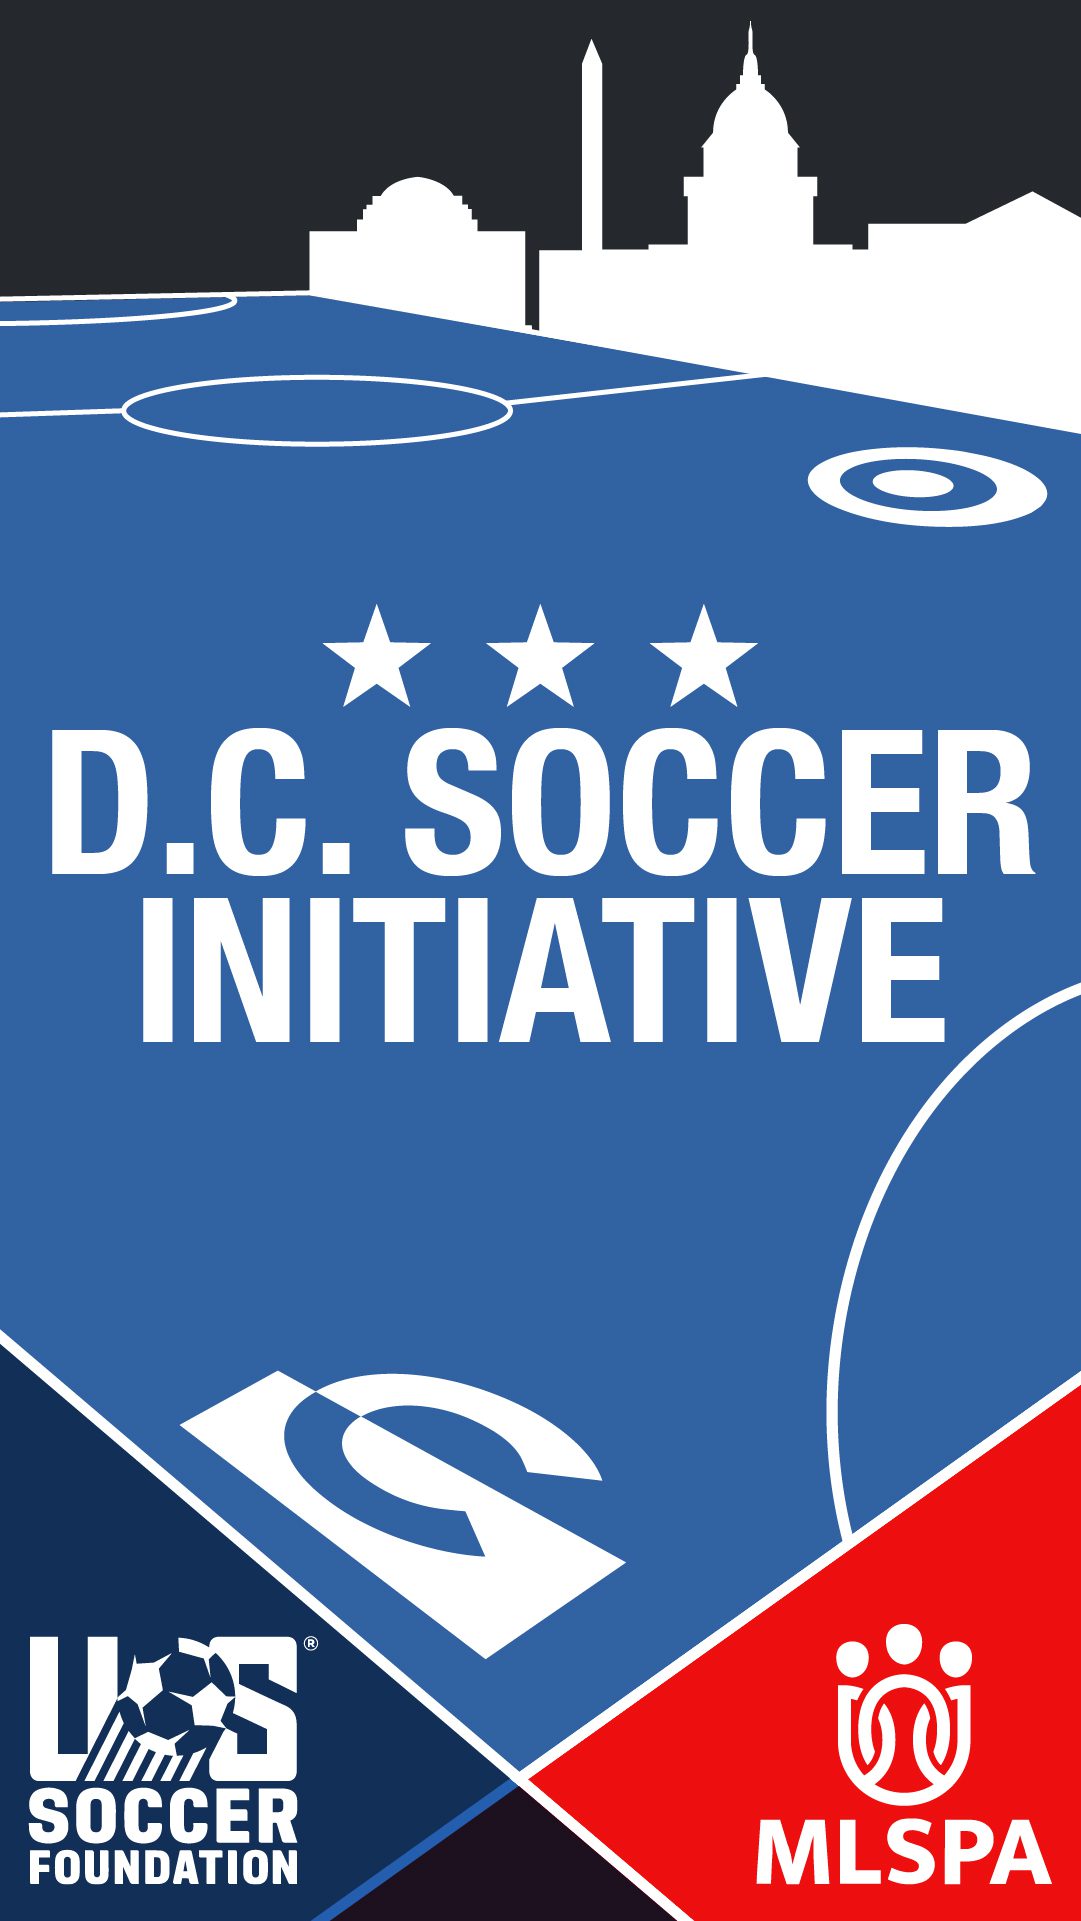 The MLSPA is partnering with The US Soccer Foundation, Target, DC Public Schools and the A. James & Alice B. Clark Foundation to build 10 mini-pitches at schools across D.C.